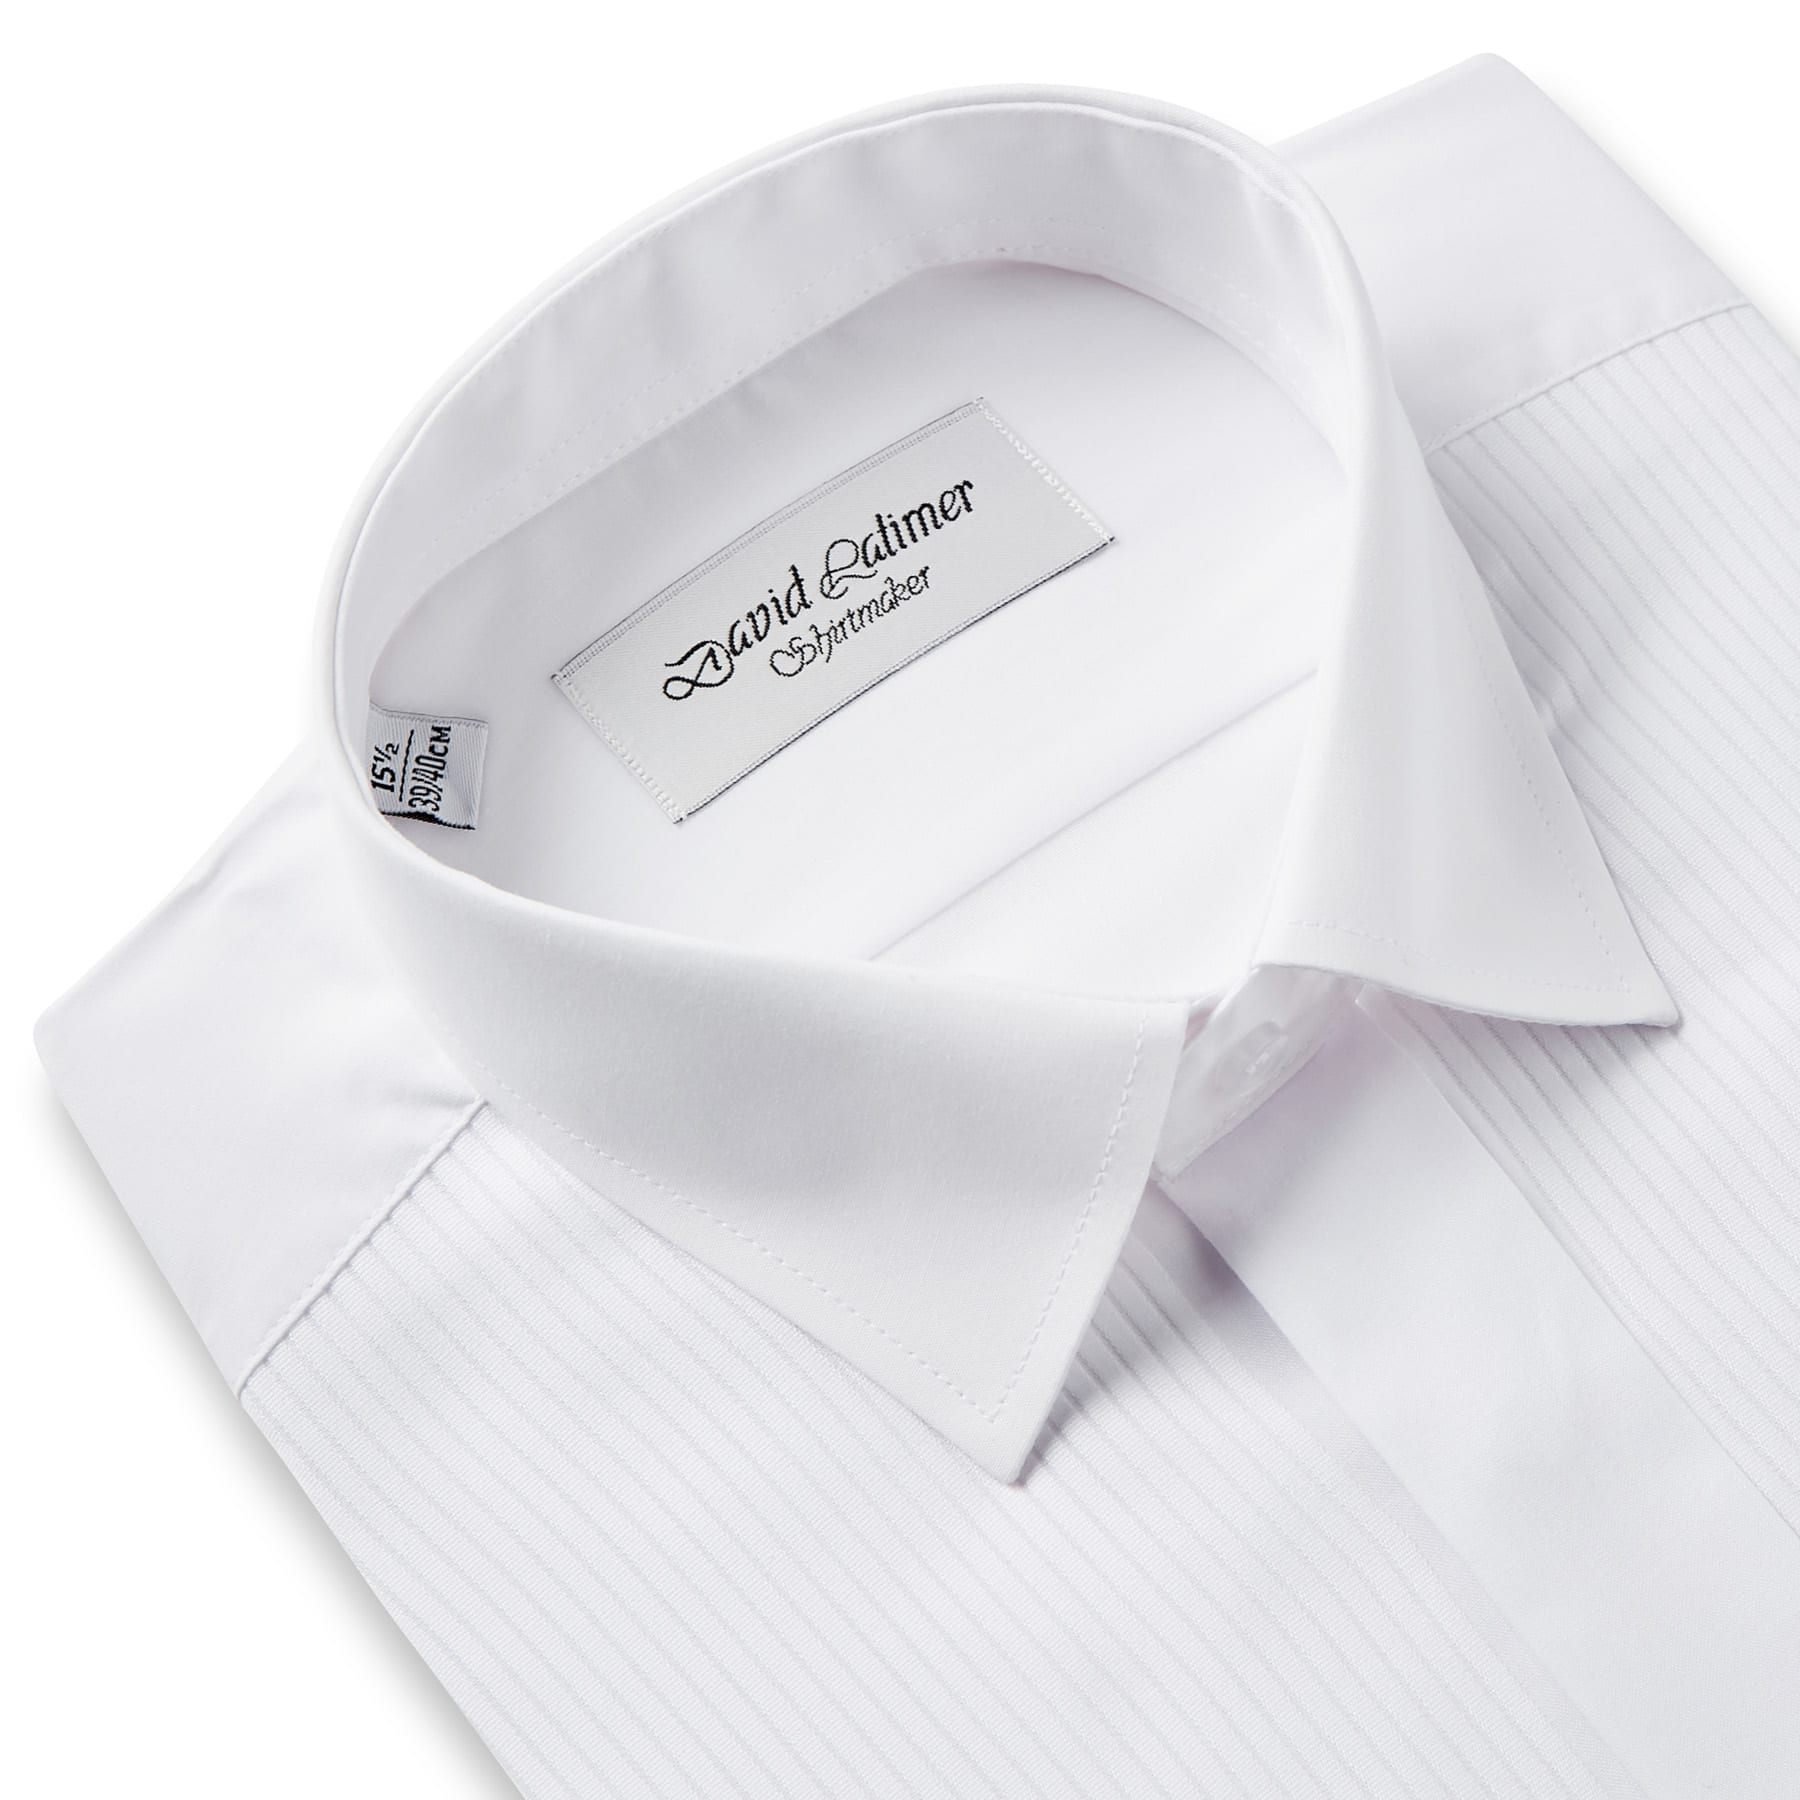 Pleated Front Dress Shirt with Standard Collar